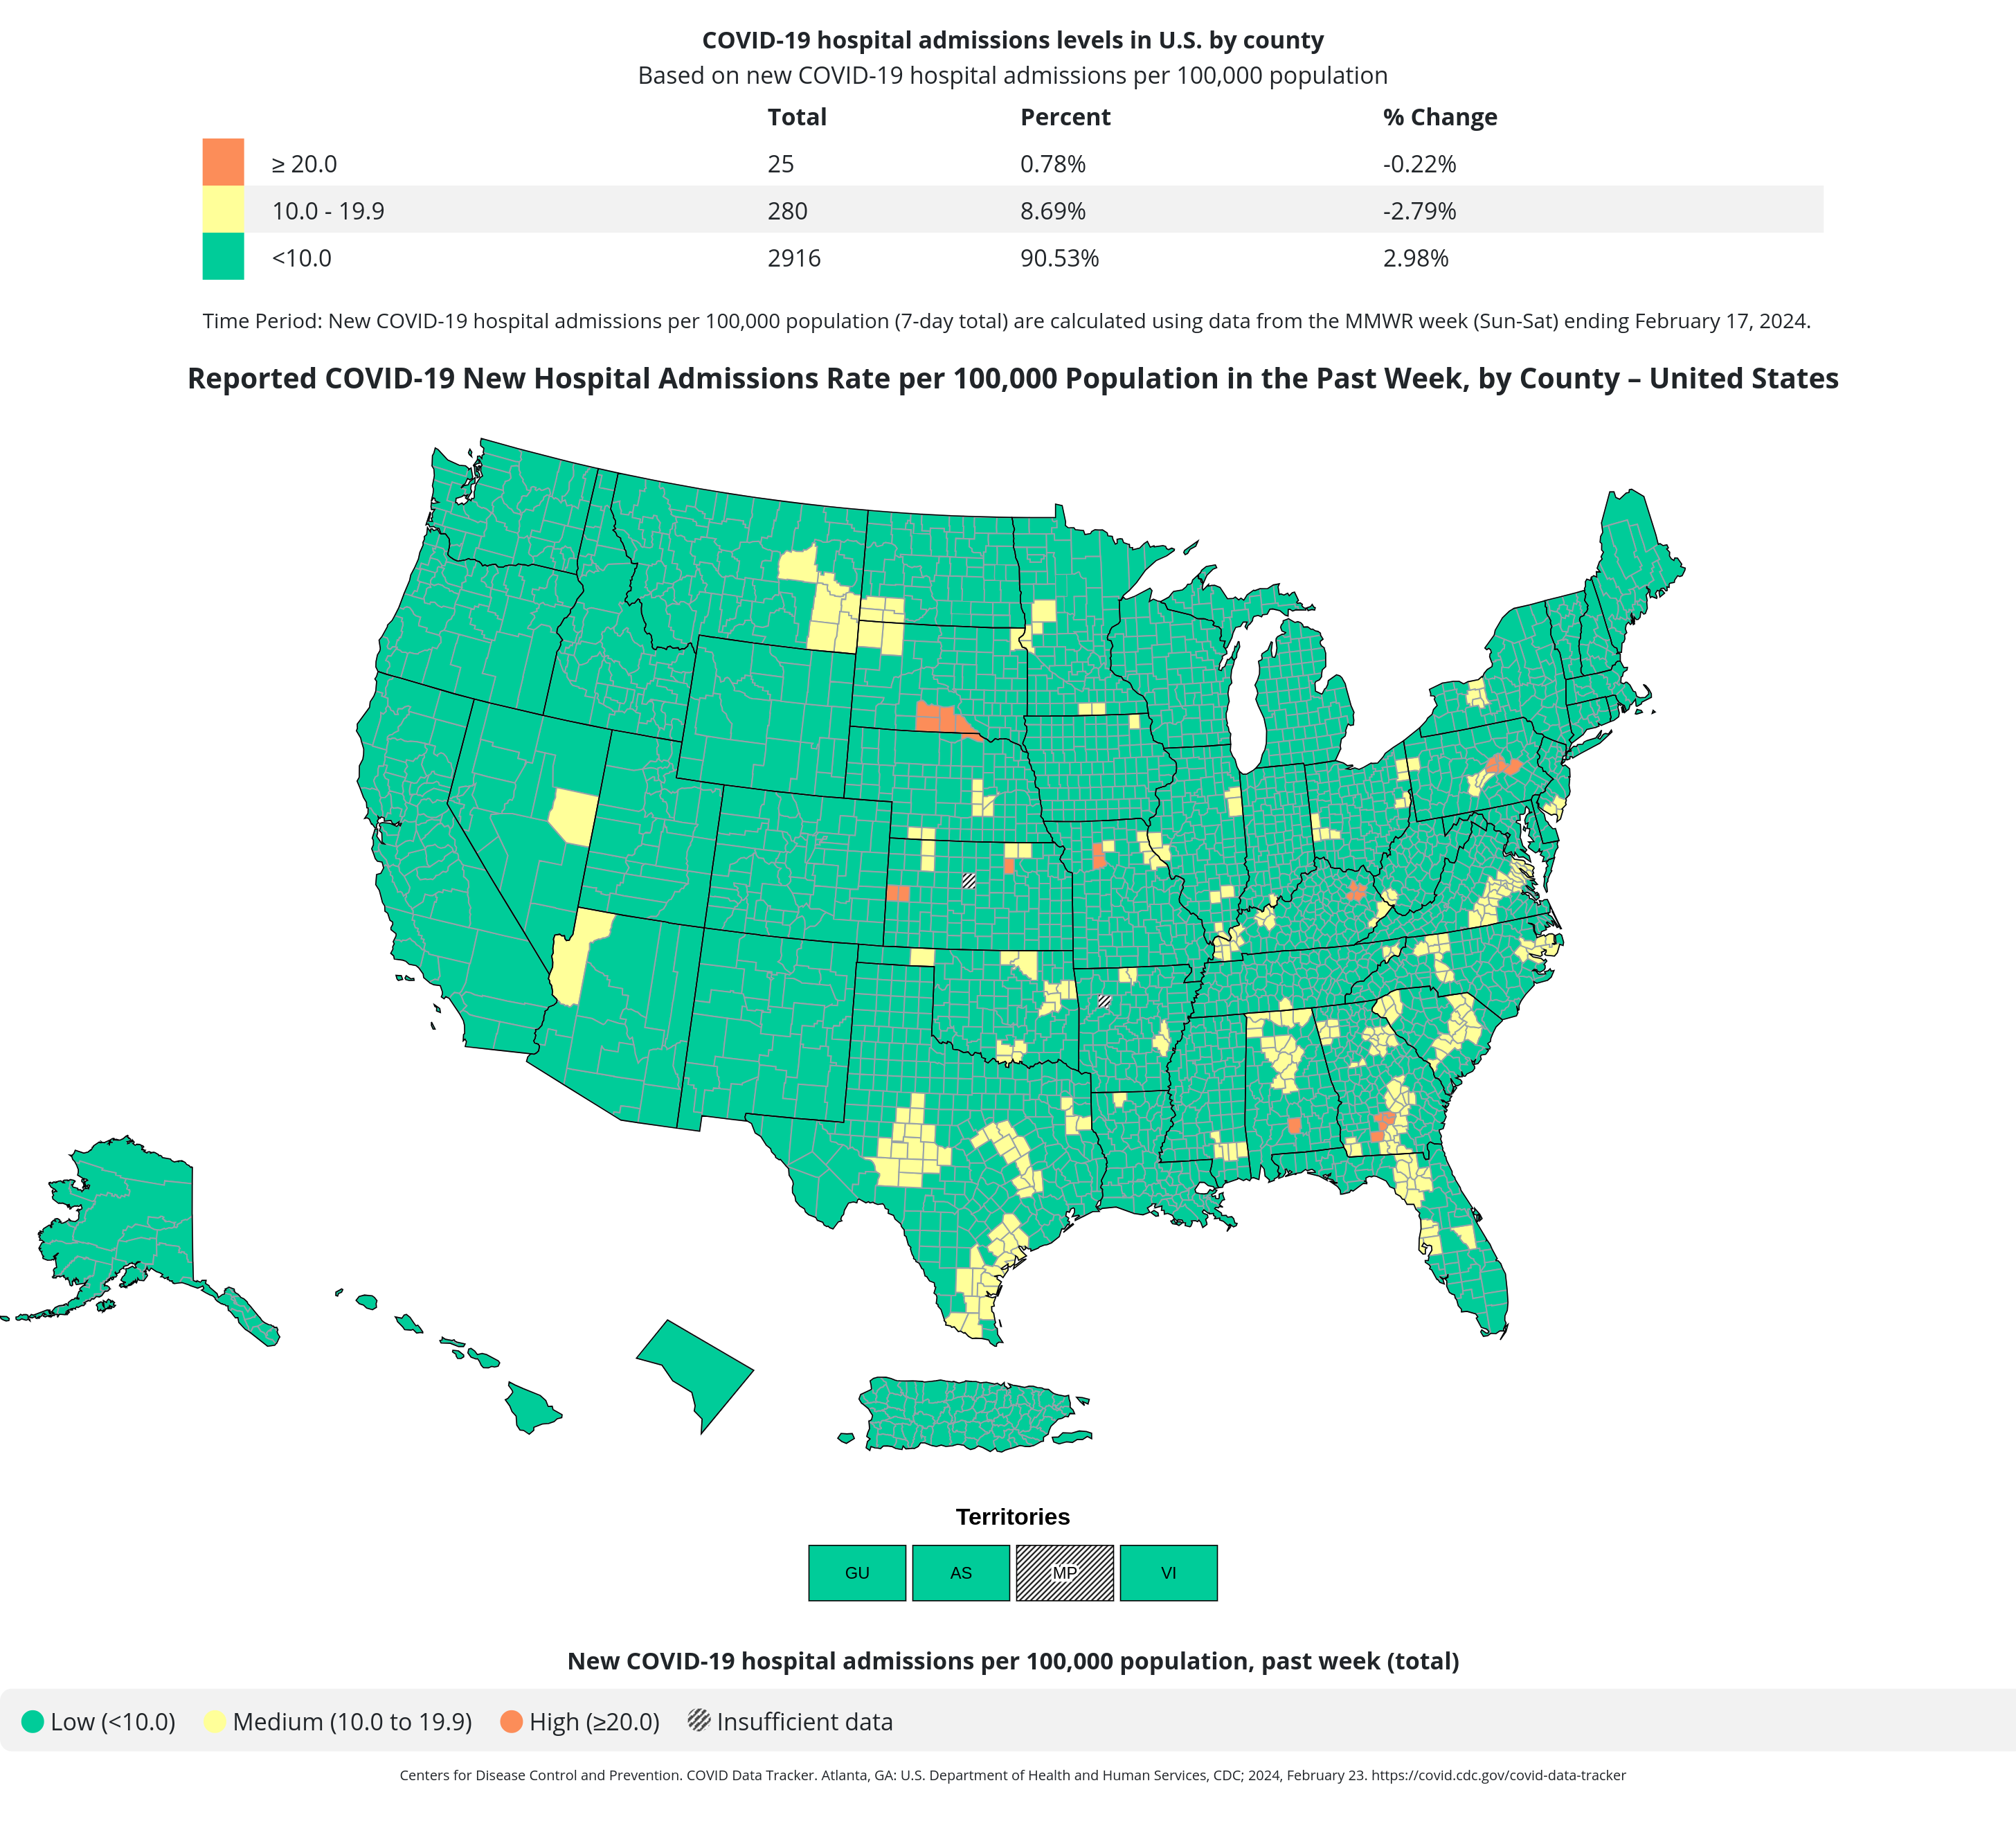 COVID-19 hospital admissions levels in U.S by county, data through Feb 17, 2024